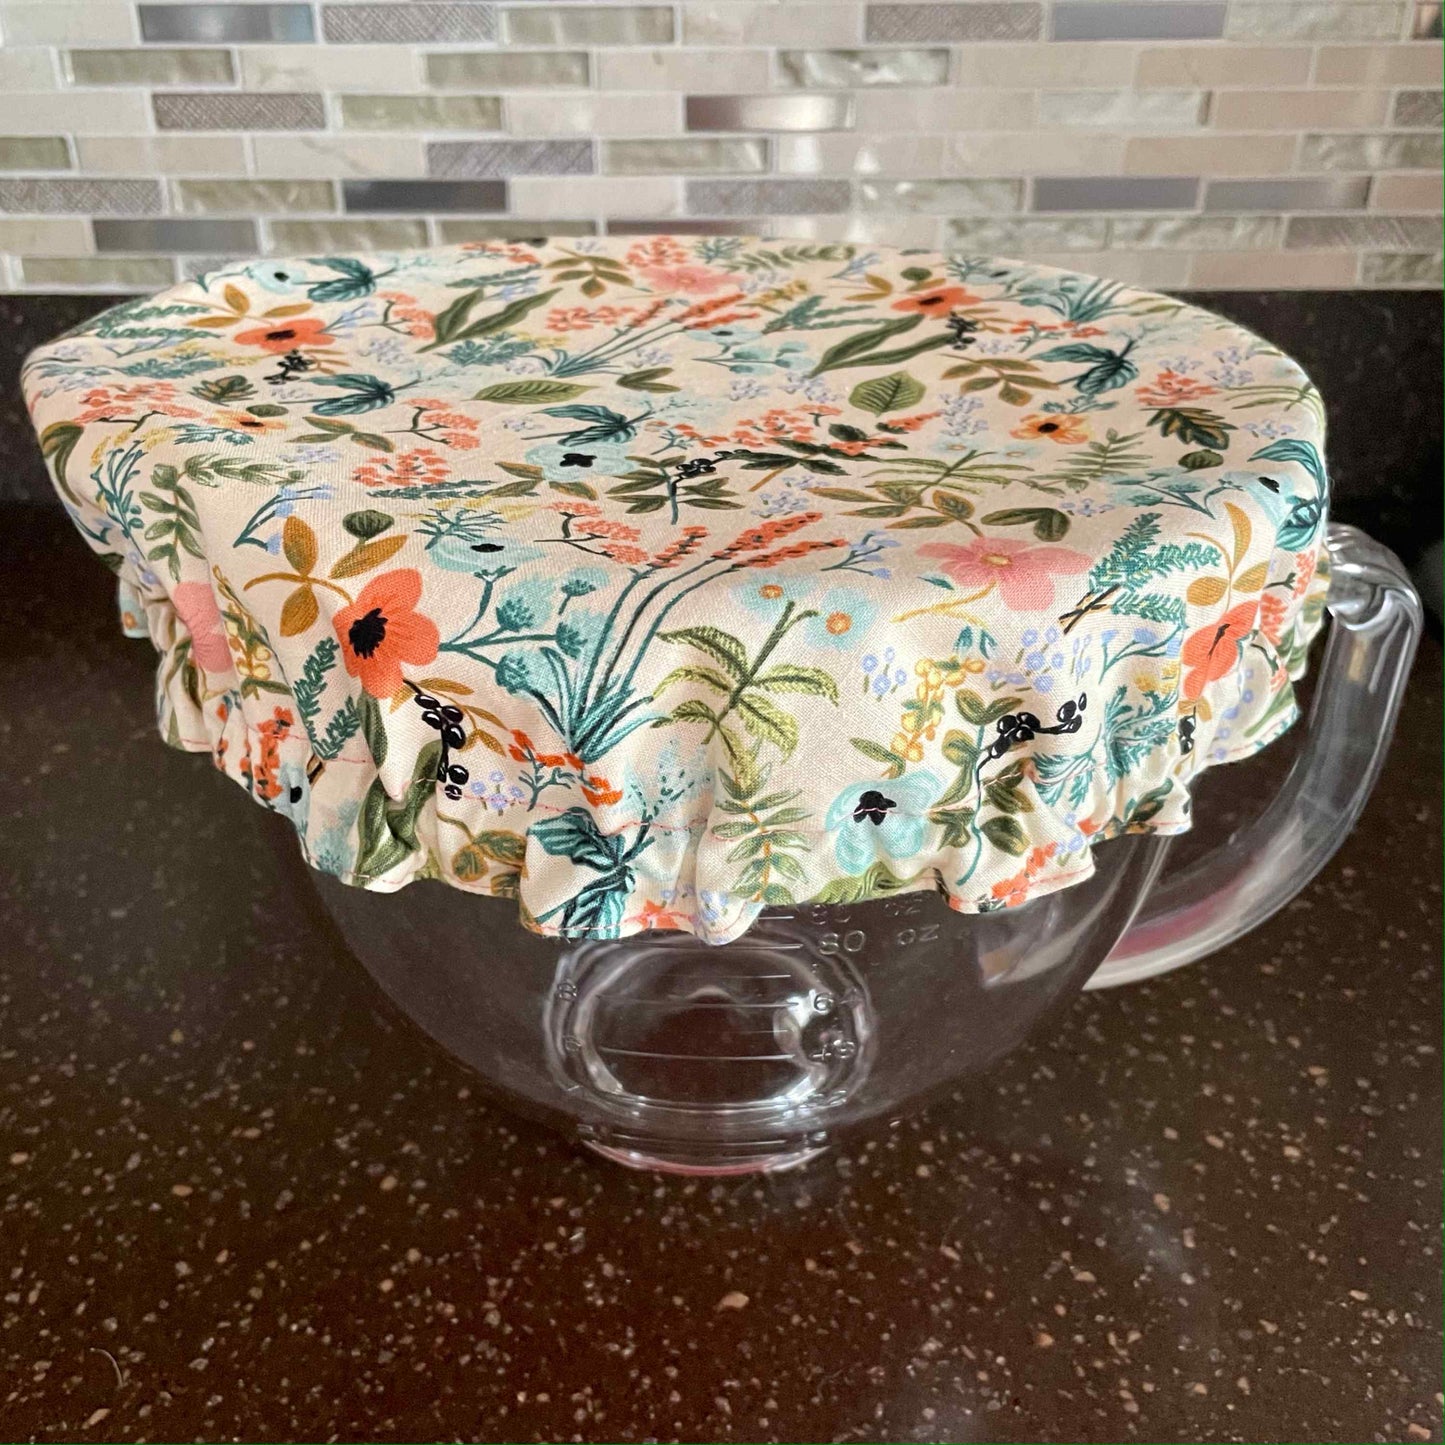 Stand Mixer Bowl Covers - Floral Herb Garden